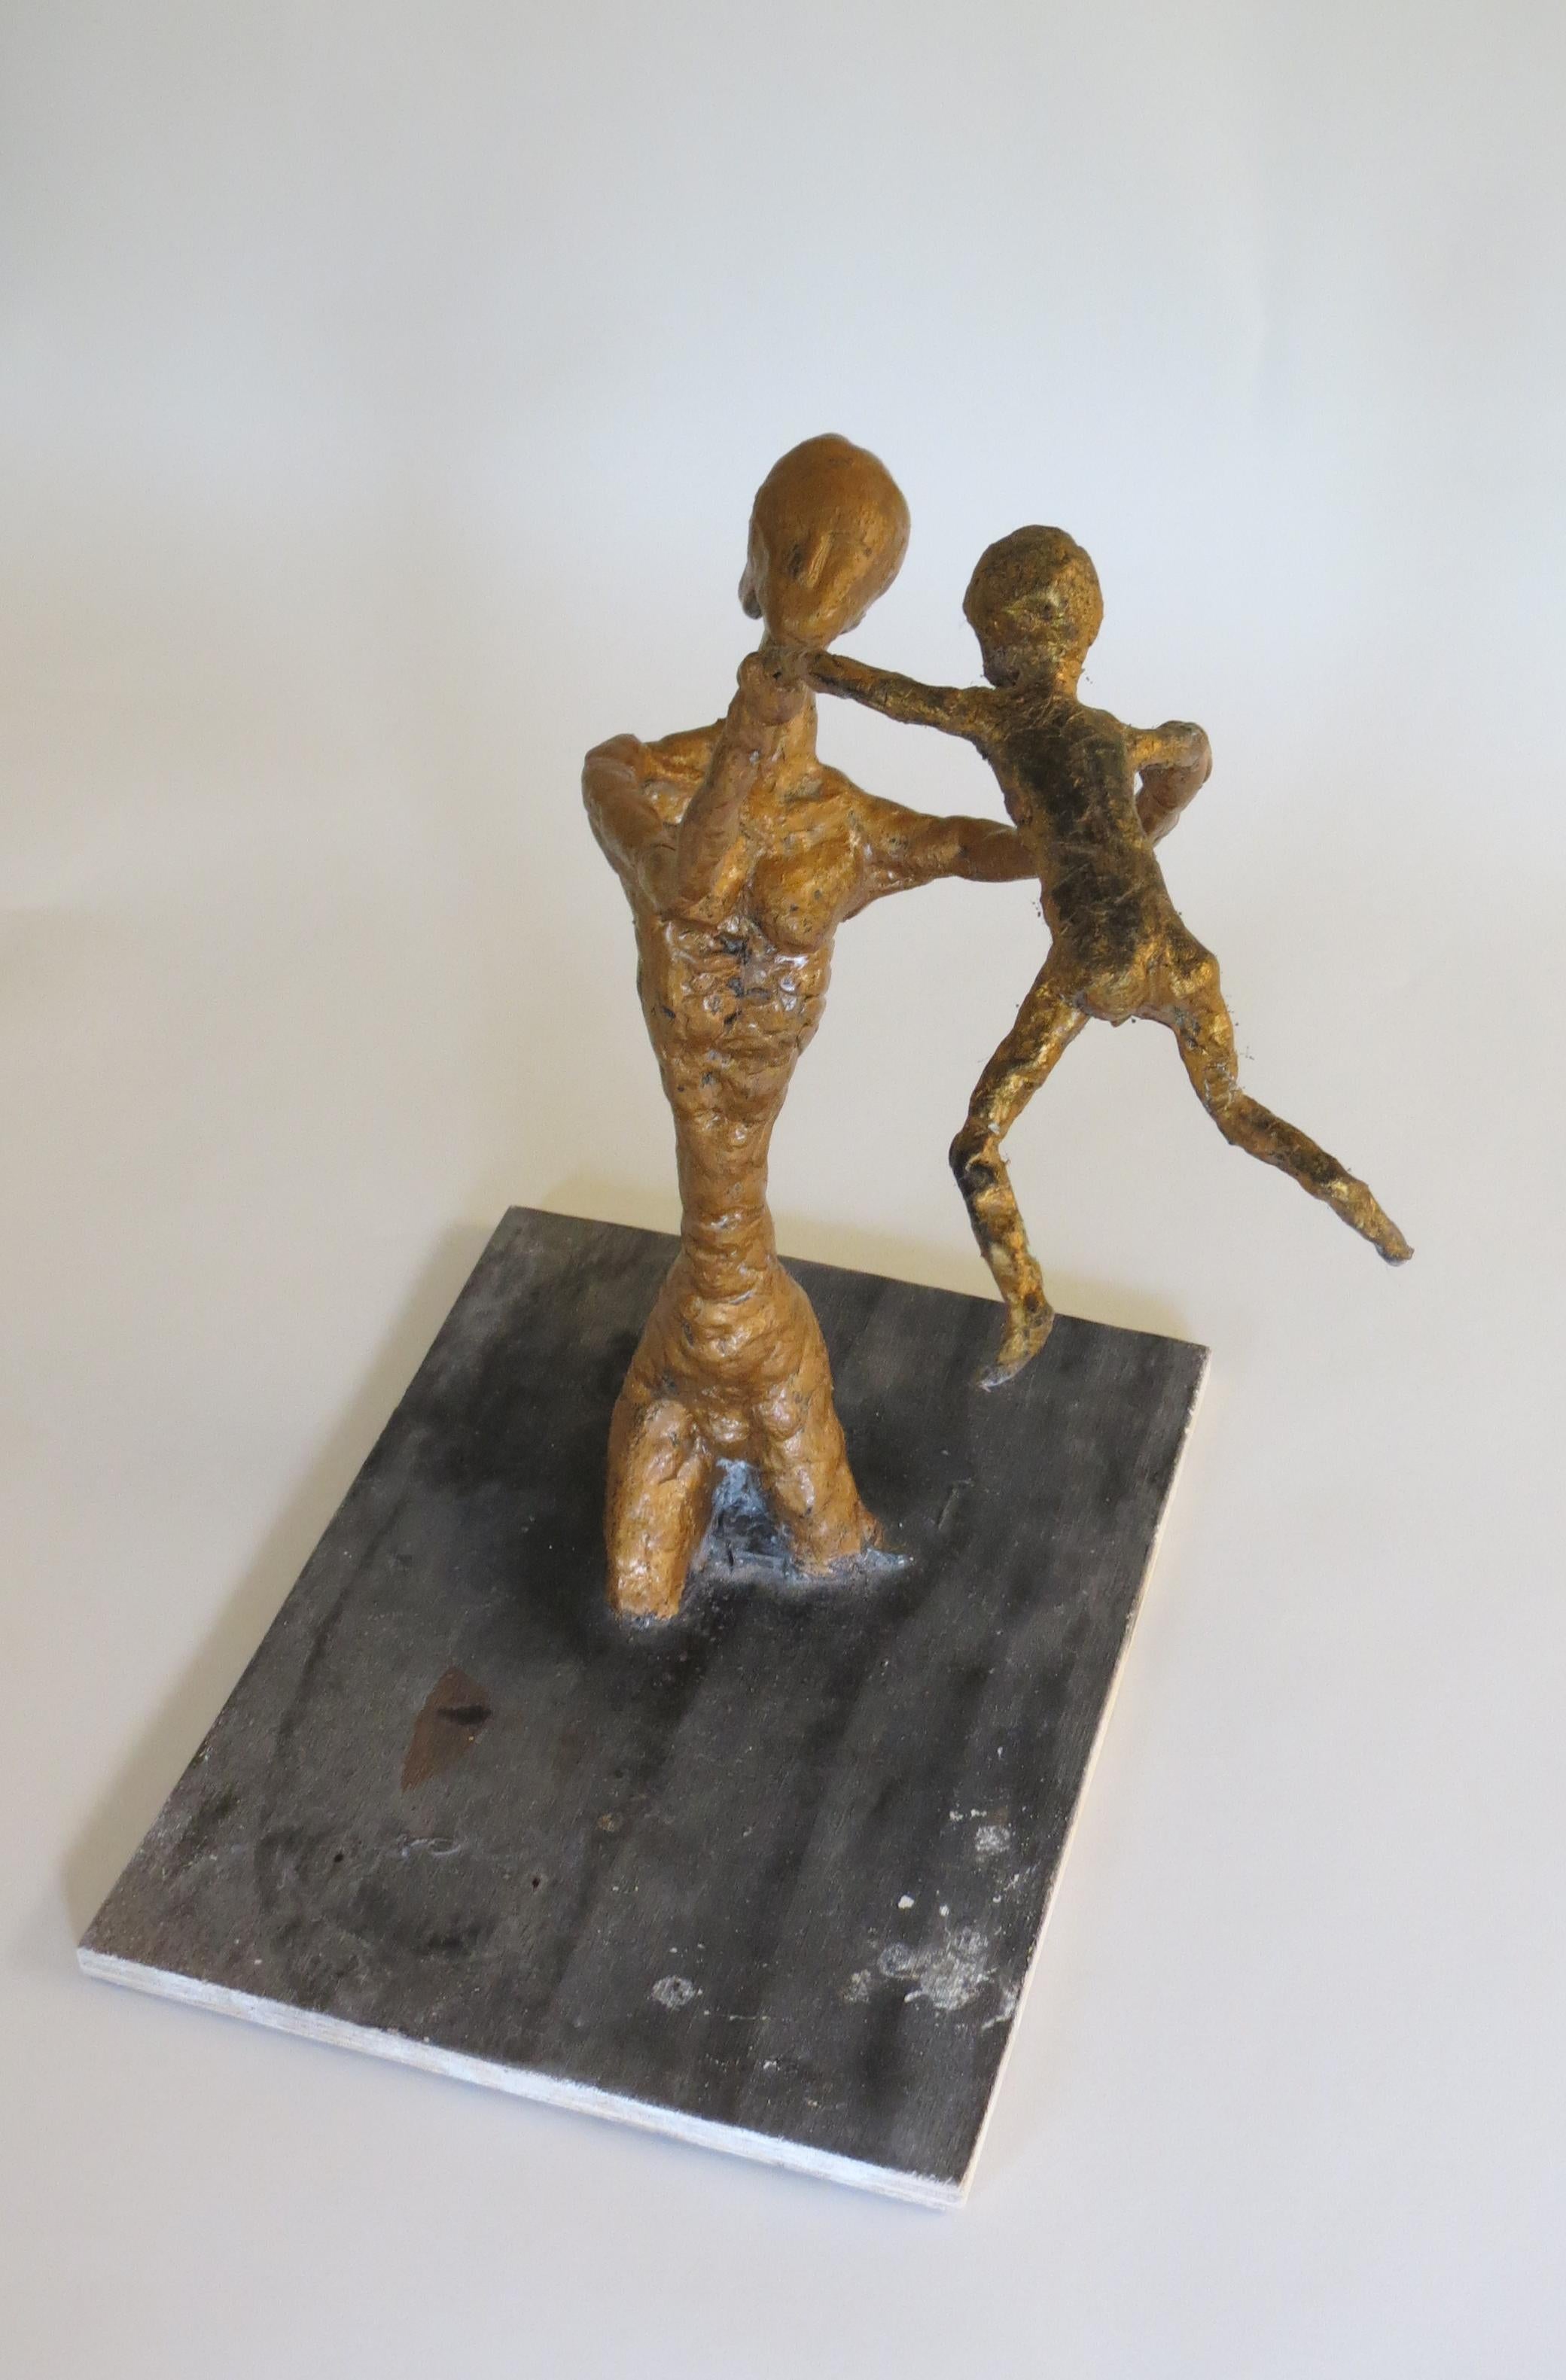 A unique plaster maquette of mother and boy child. Hand produced by Bill Young, year 2000.

On original board, good over all condition, some minor loss to paint.

This piece came from the deceased artist's estate. 

   